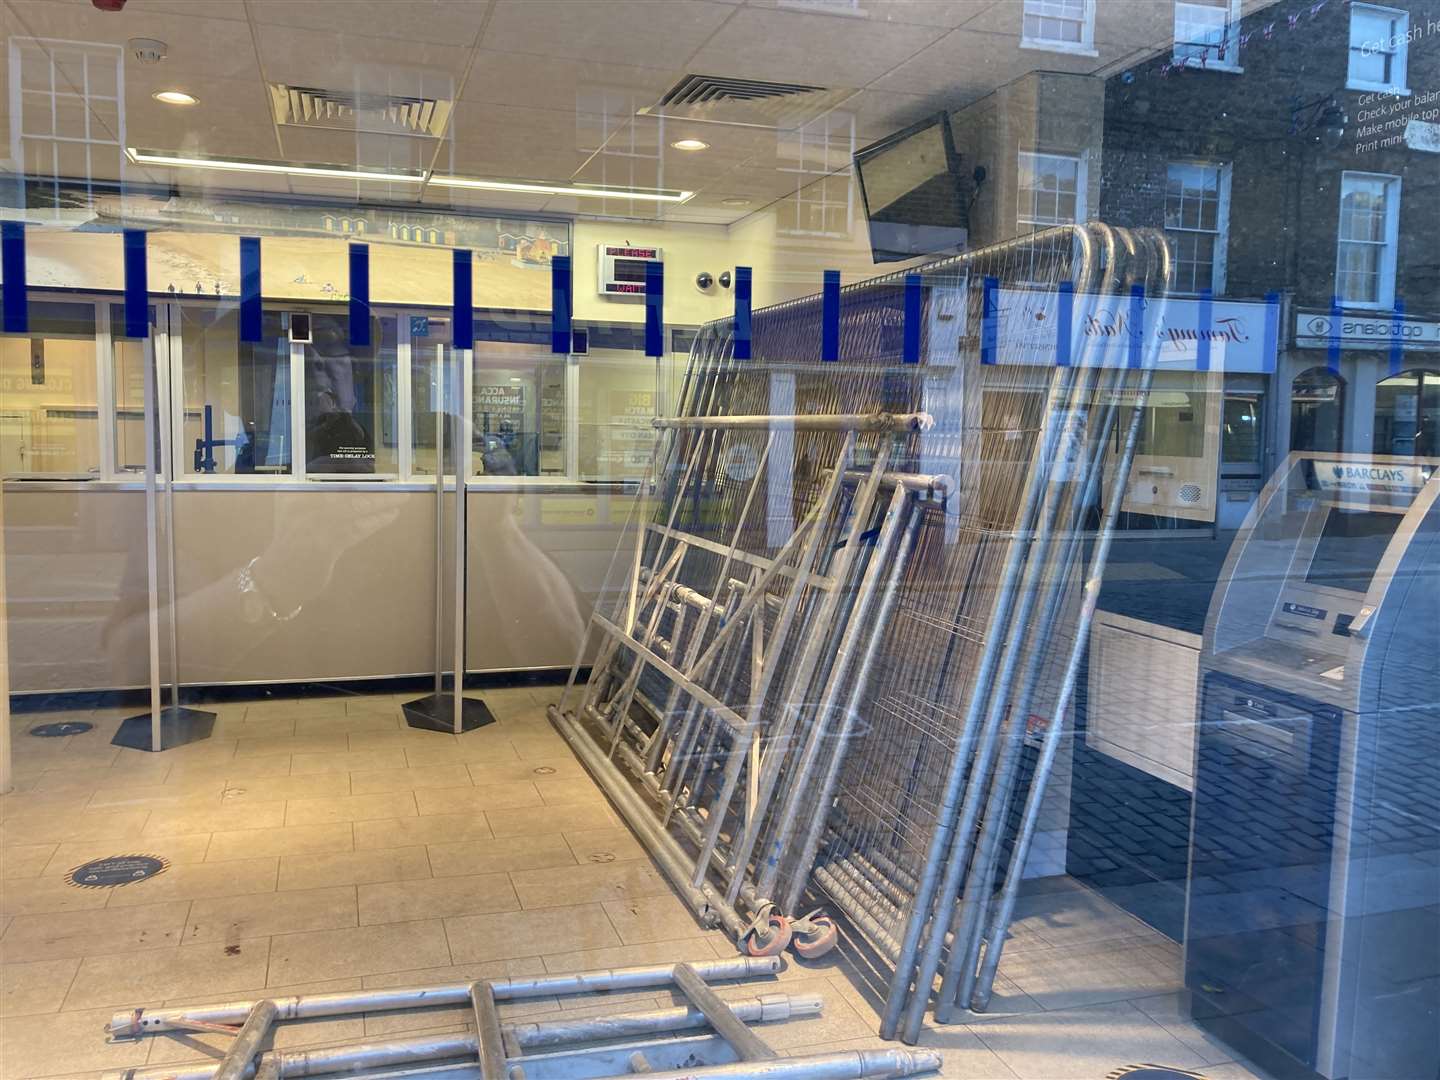 Inside Barclays Bank which has shut for good in Sheerness Broadway. Workers arrived to unload scaffolding and take away money during the Free Music Friday event